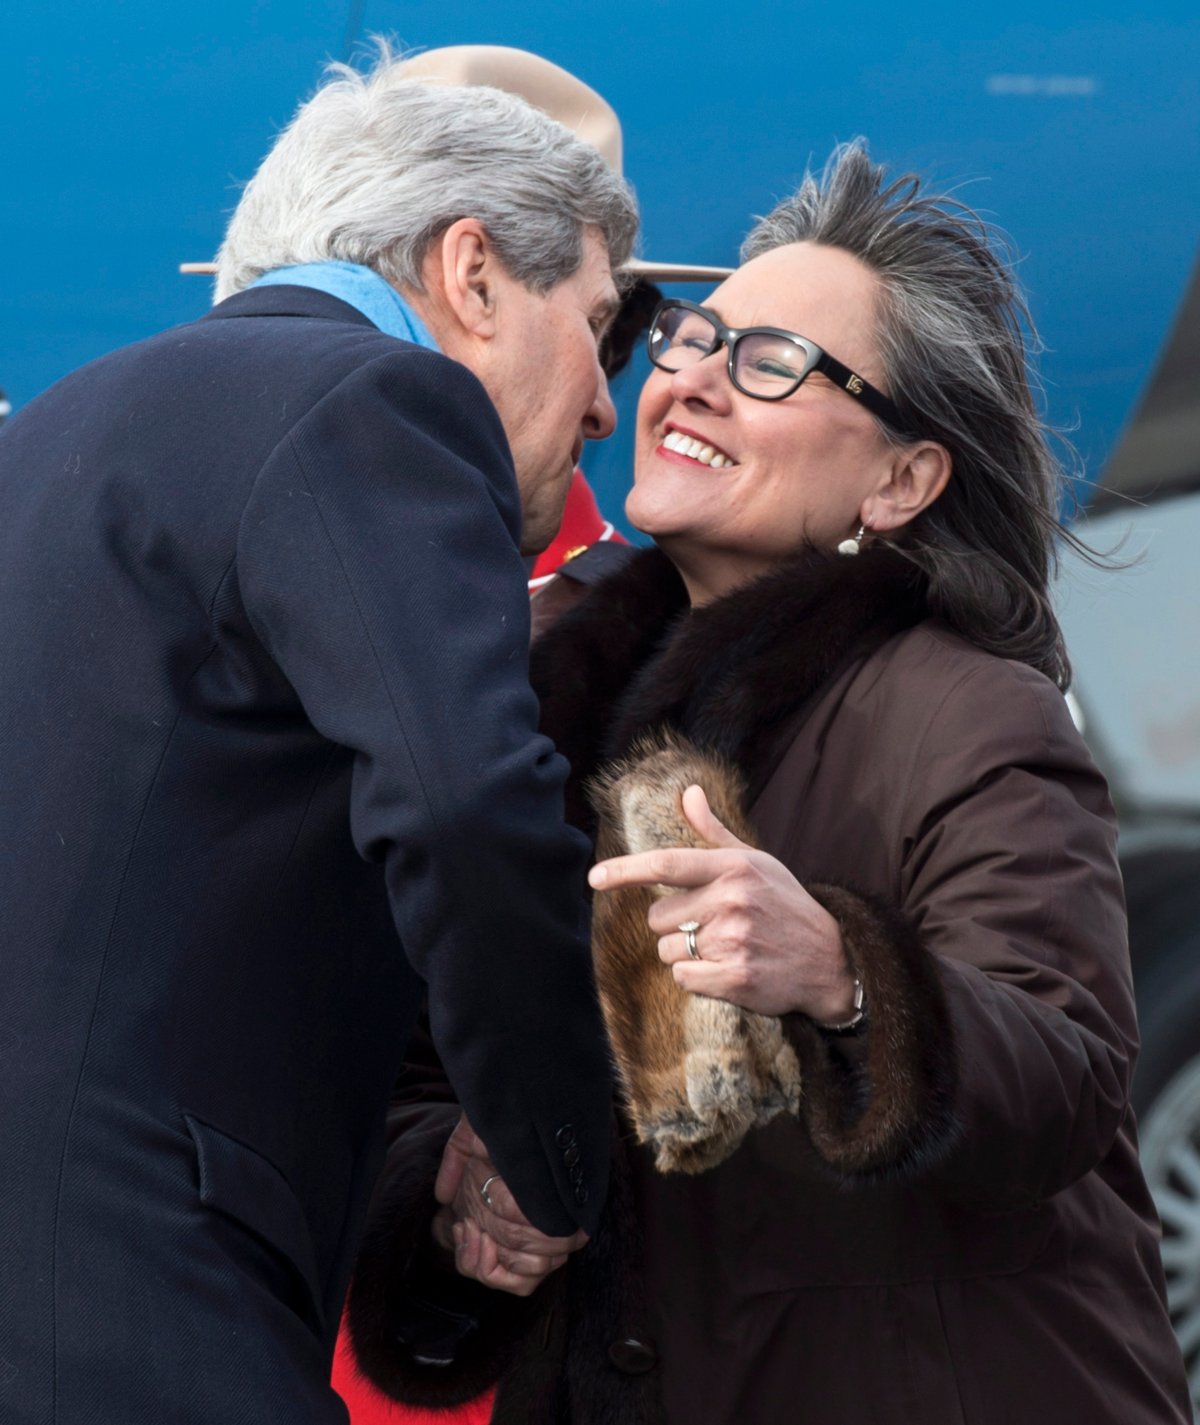 United States Secretary of State John Kerry is greeted by Leona Aglukkaq, Canadian Minister for the Arctic Council, as he arrives Friday, April 24, 2015 in Iqaluit, Nunavut. 